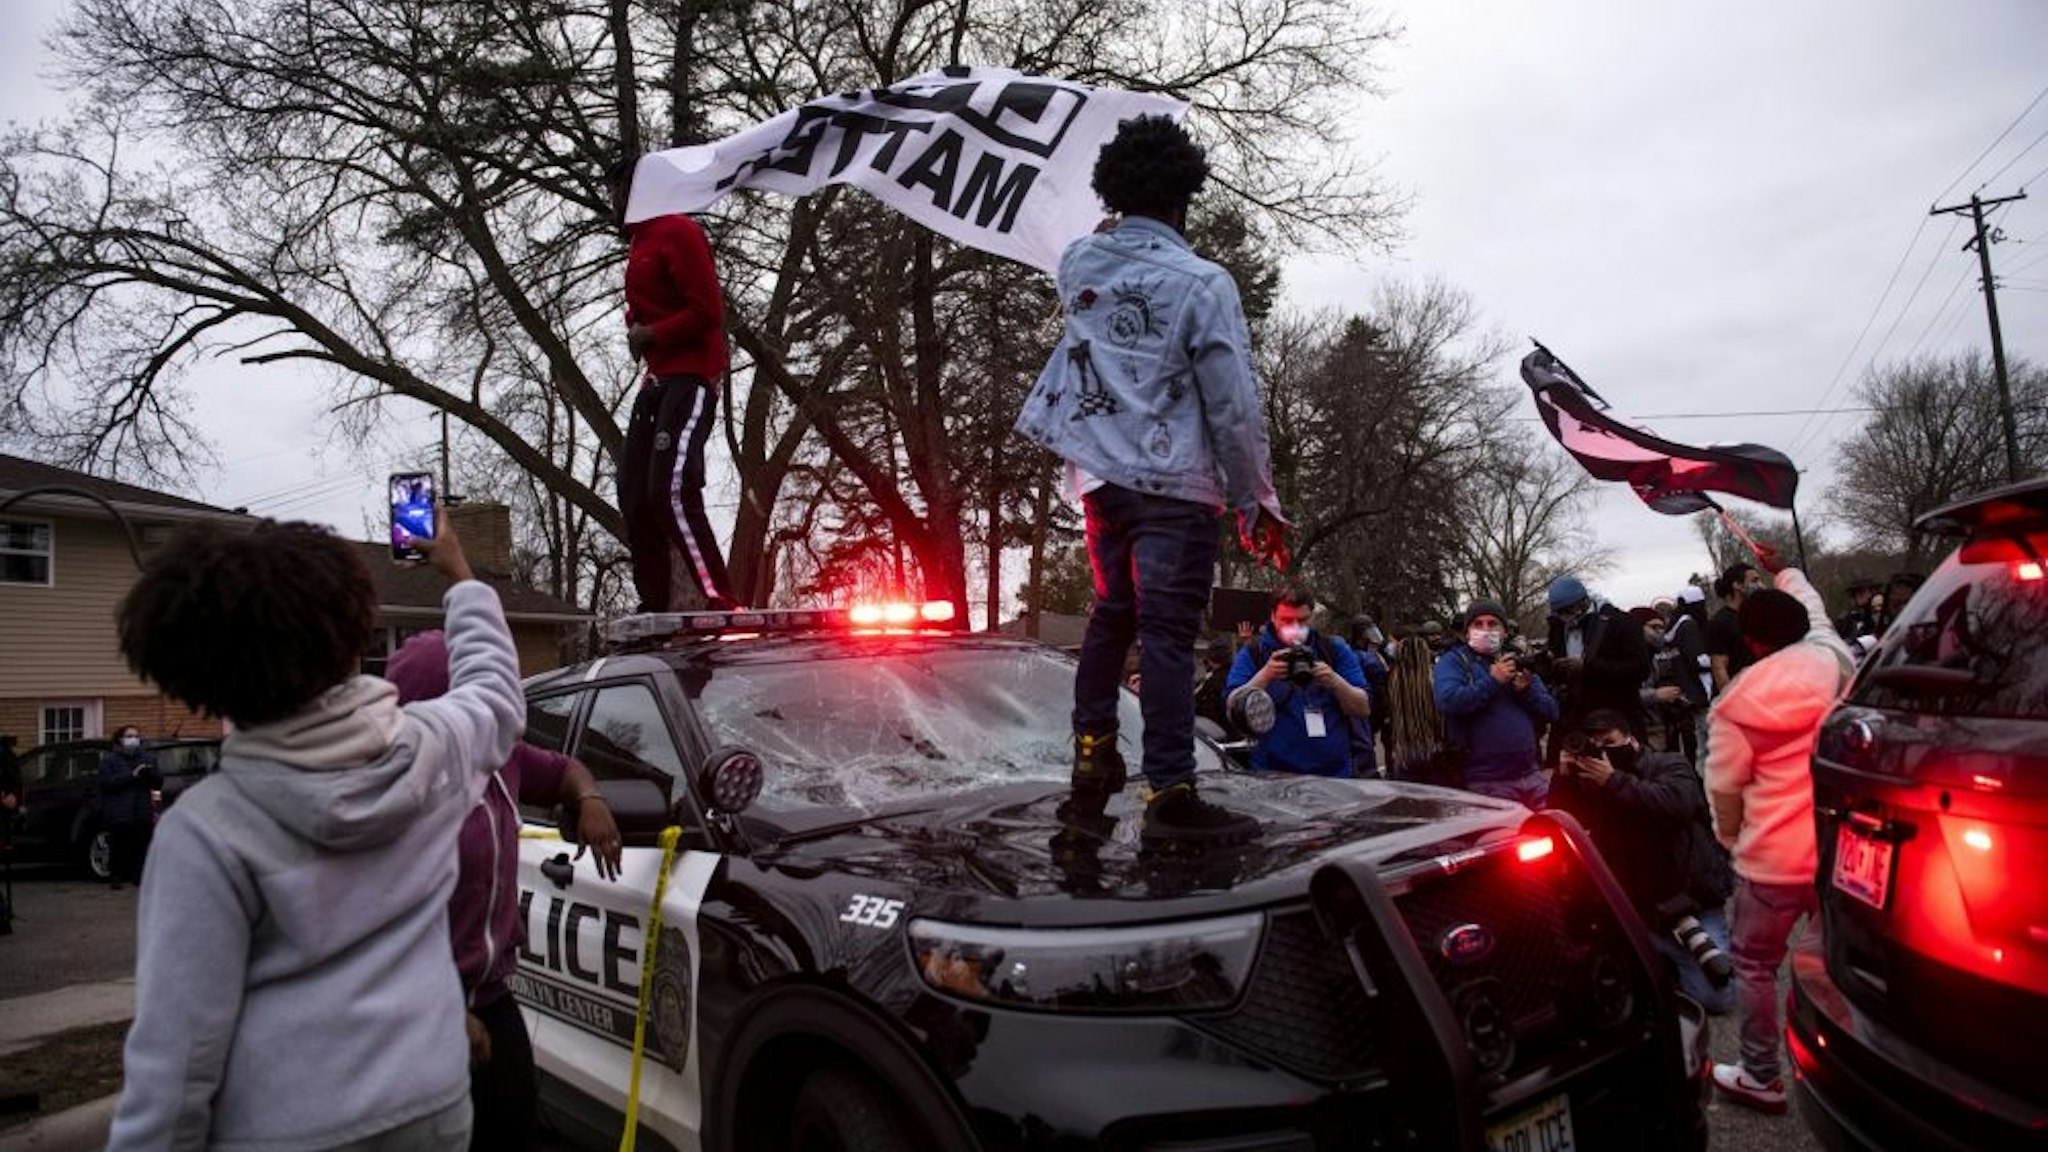 BROOKLYN CENTER, MN - APRIL 11: People stand on a police cruiser as protesters take to the streets after Brooklyn Center police shot and killed Daunte Wright during a traffic stop on April 11, 2021 in Brooklyn Center, Minnesota. A crowd gathered to confront police as they held a line while investigators searched the scene.